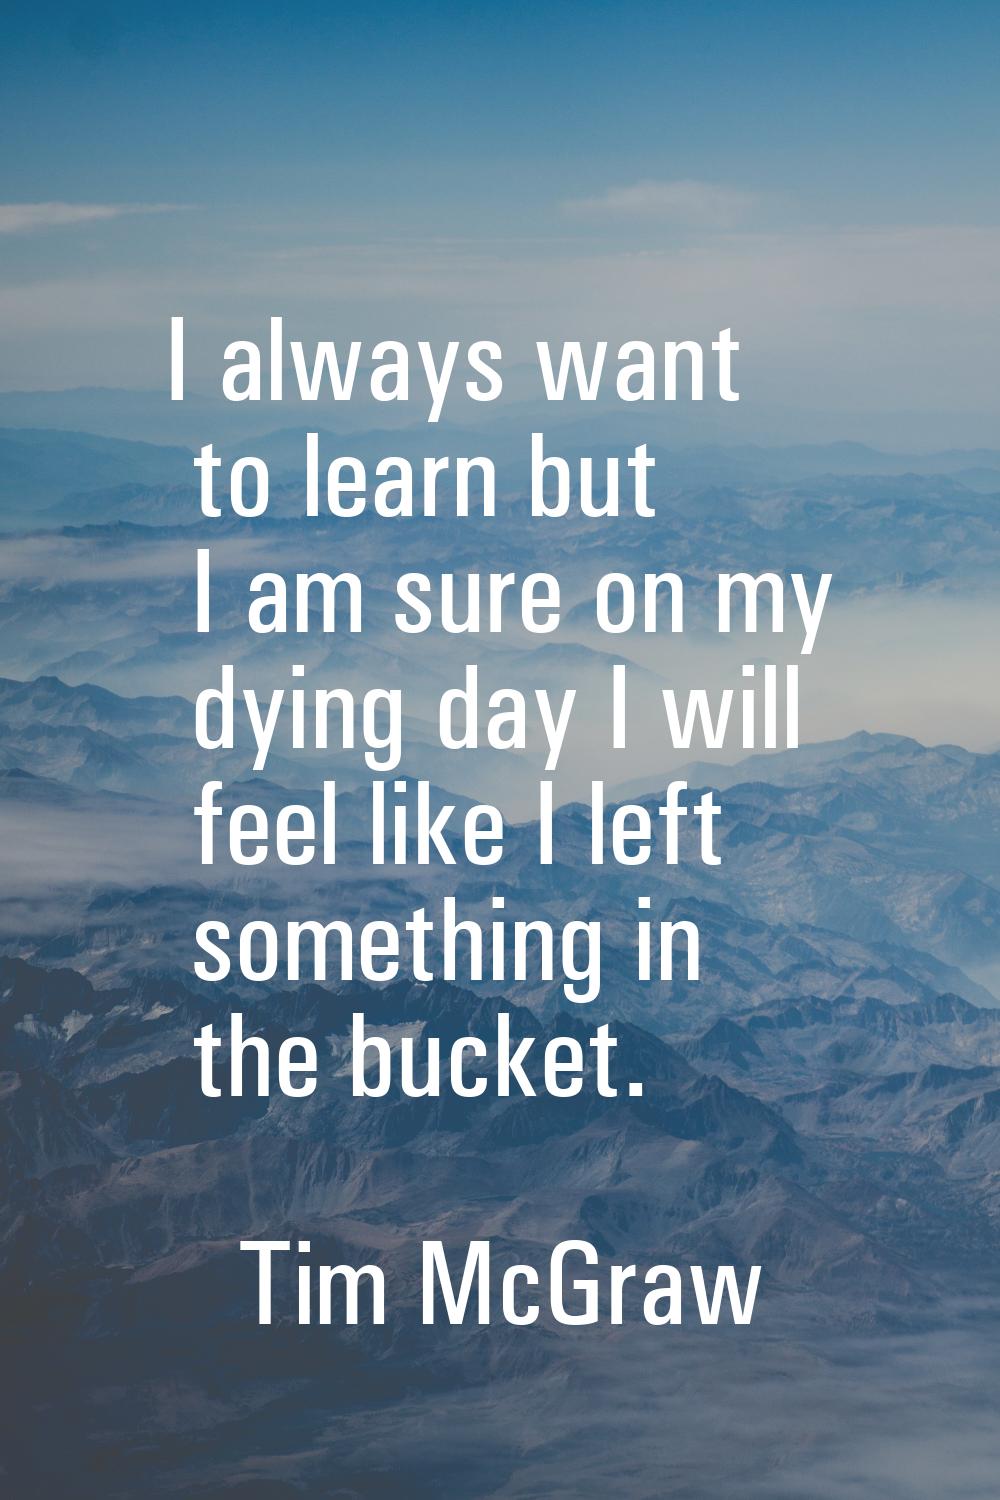 I always want to learn but I am sure on my dying day I will feel like I left something in the bucke